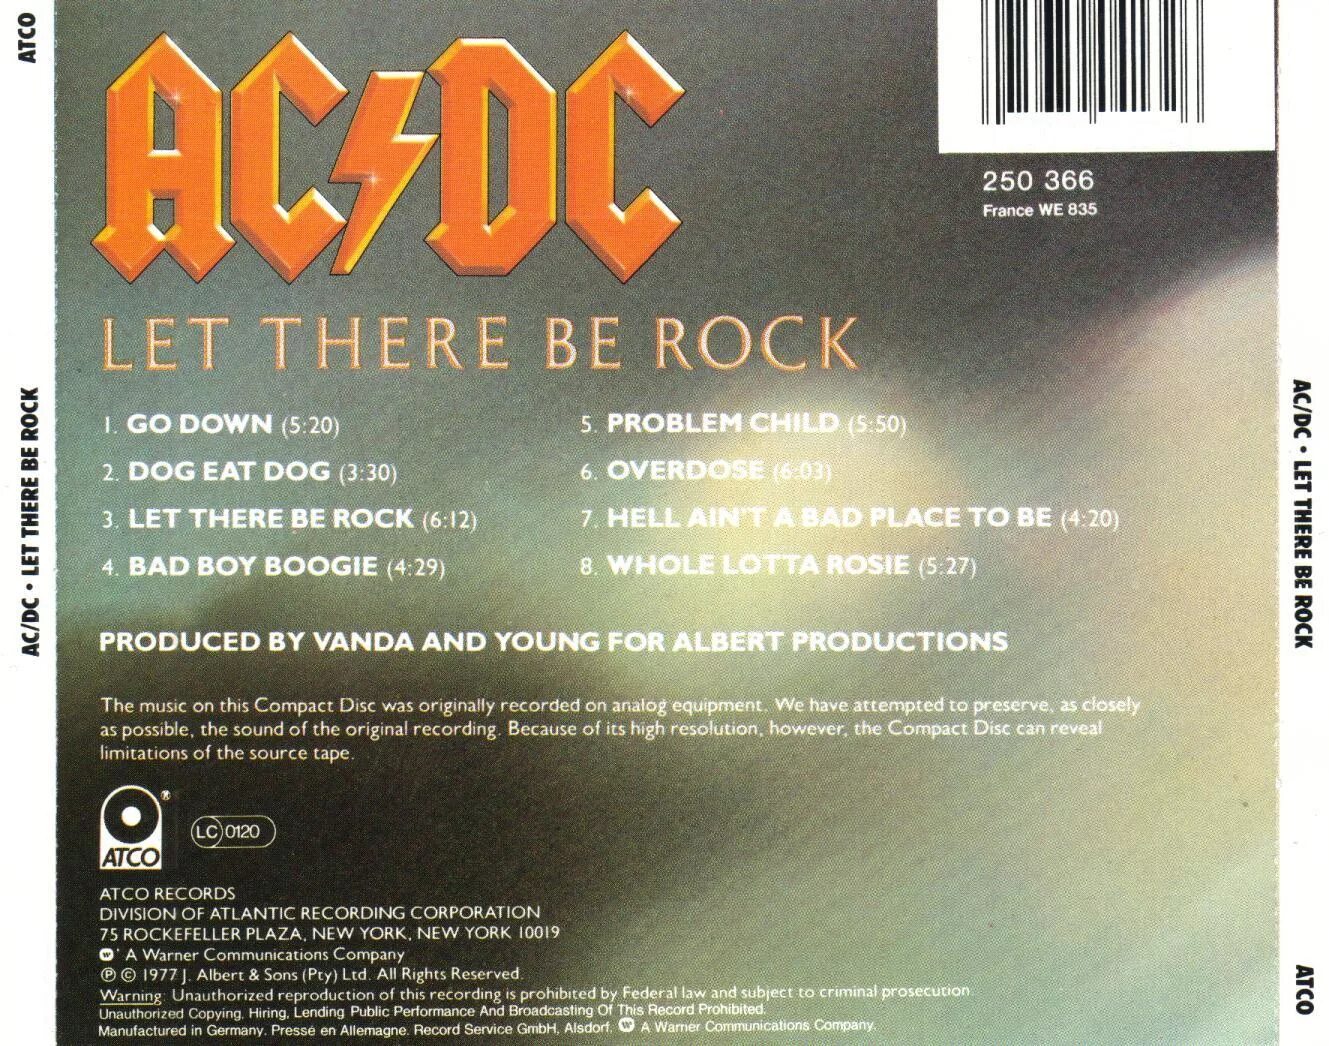 Ac dc let. AC DC 1977. Let there be Rock AC/DC обложка. Рок 1977 Let there be Rock. AC DC LP 1977.